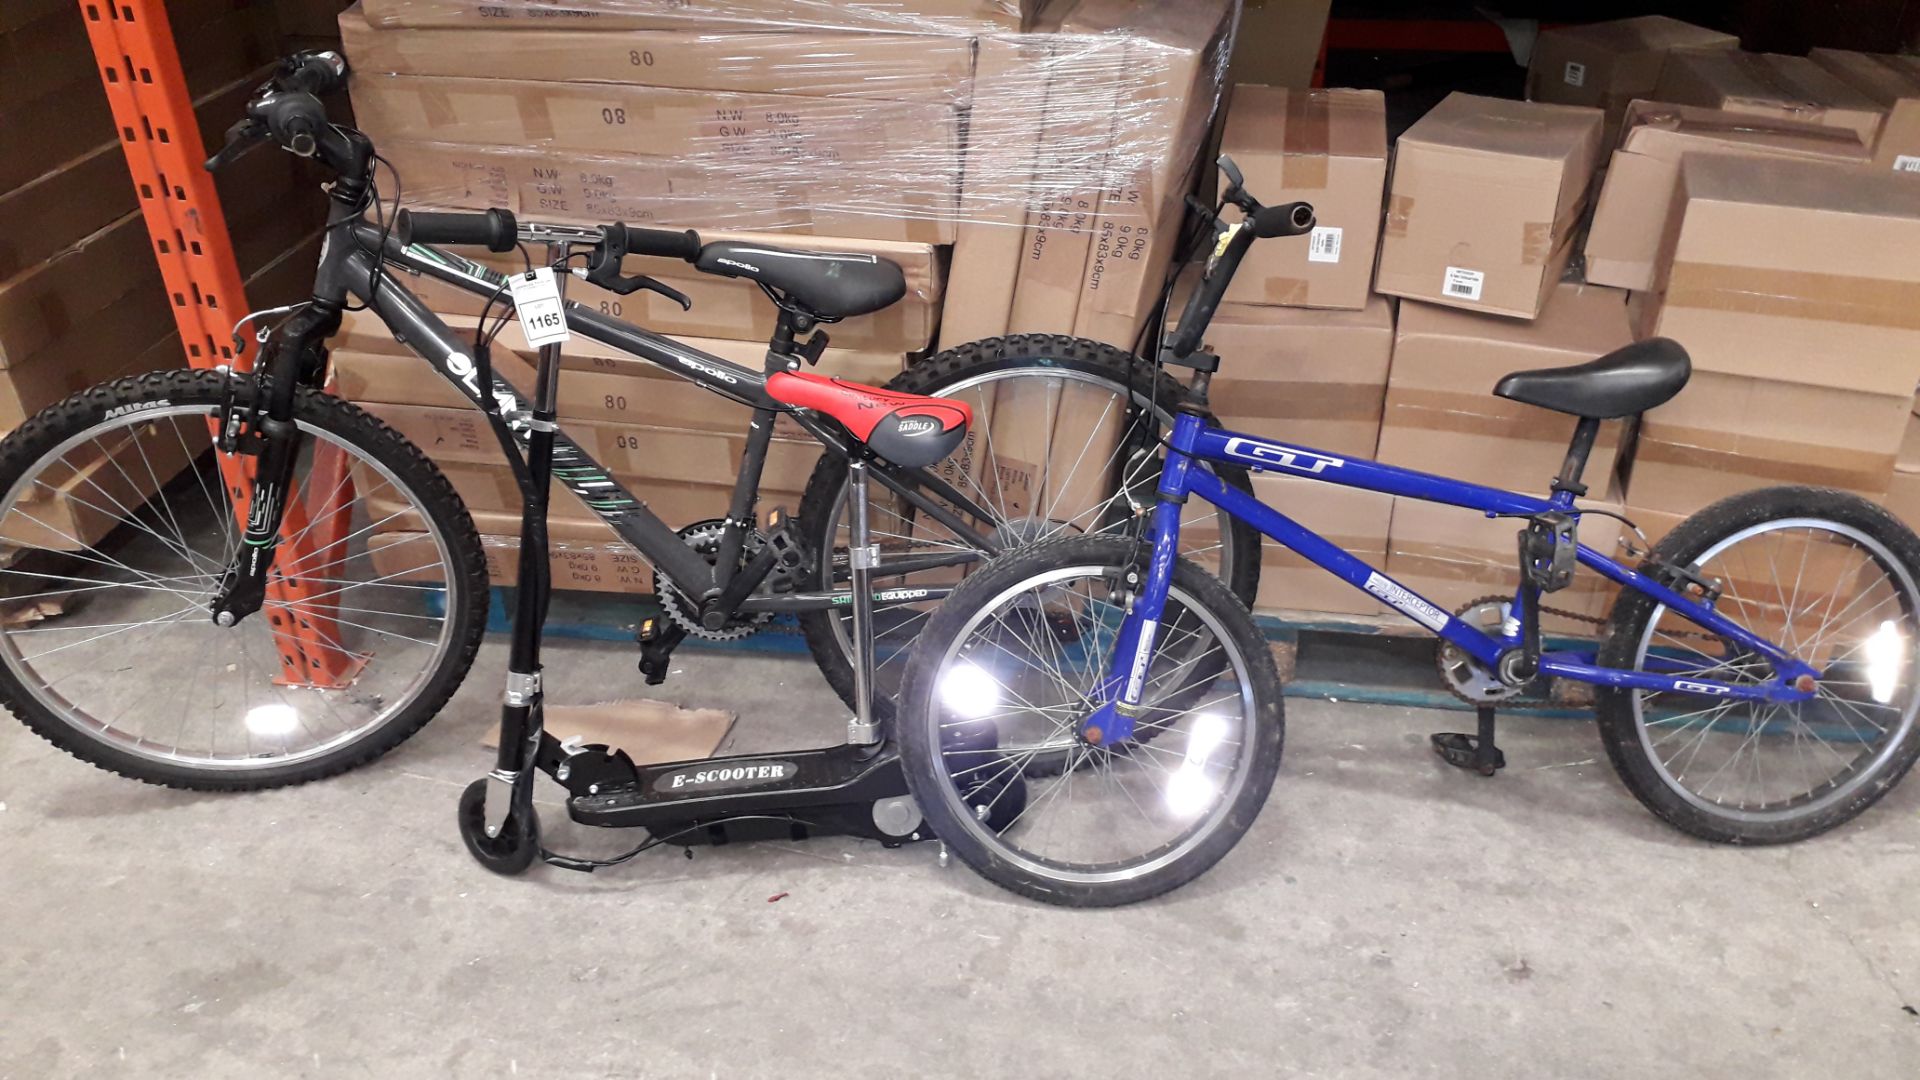 2 X BICYCLES ie. GT INTERCEPTOR 4130 CR-MO BMX , APOLLO ELANT WITH SHIMANO , AND ALSO COMES WITH 1 X